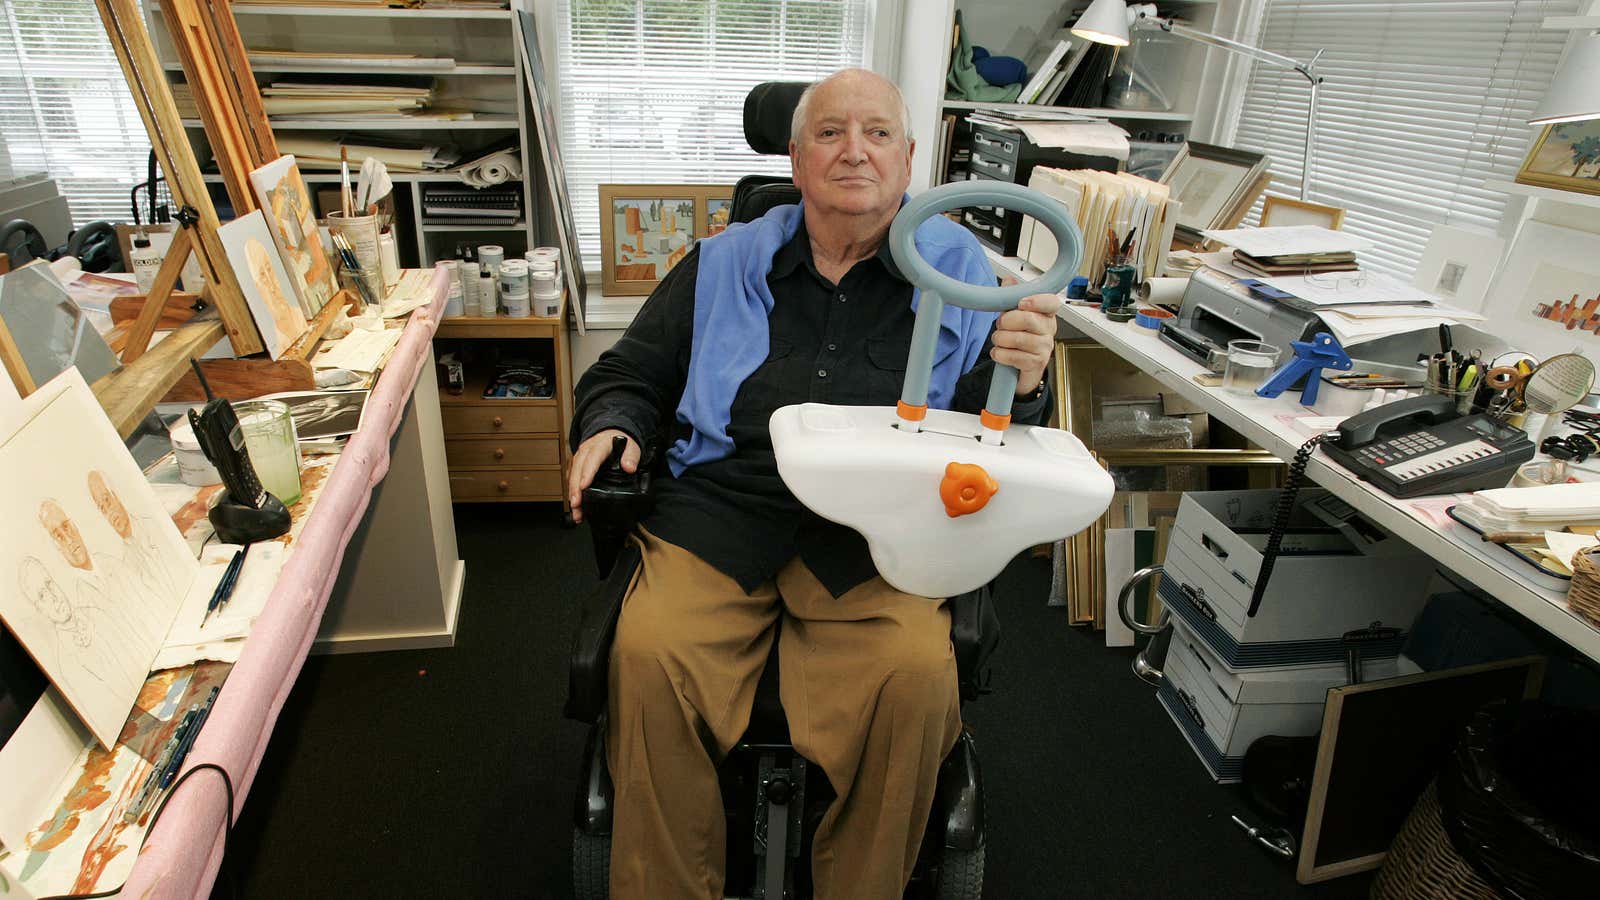 Michael Graves at his studio in 2009, holding a bathtub handle  he designed.